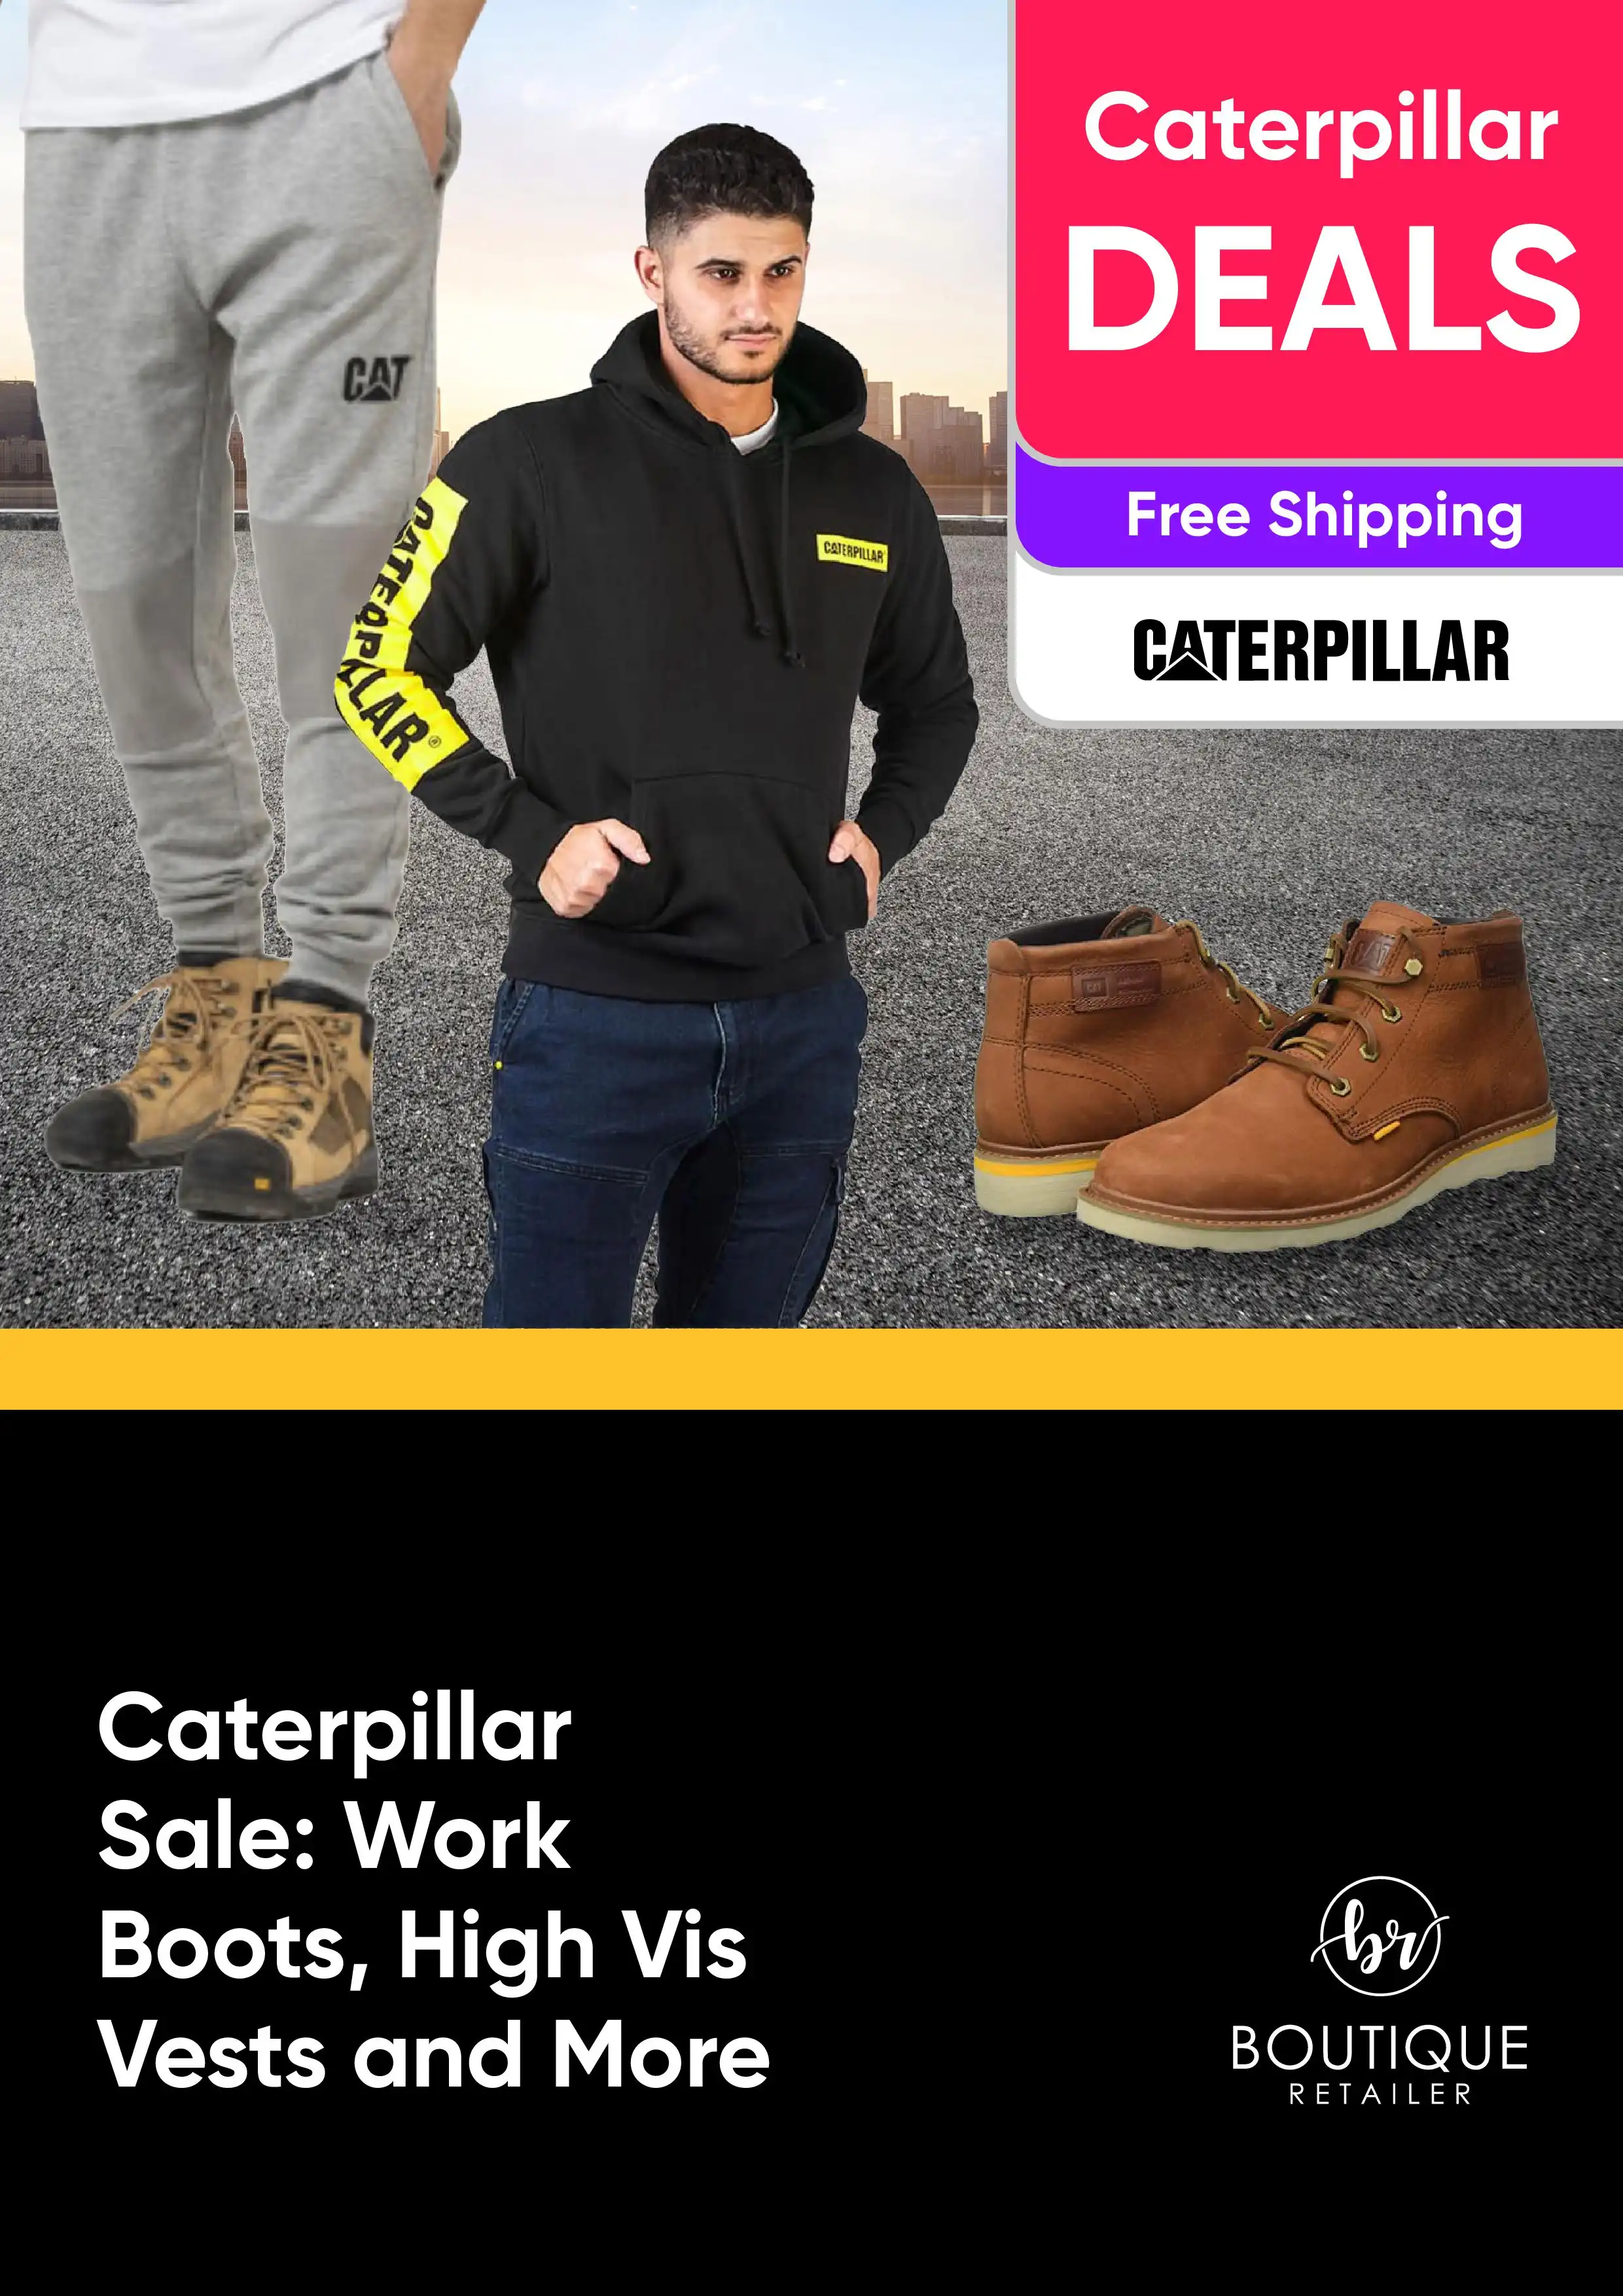 Caterpillar Sale - Work Boots, High Vis Vests and More - Caterpillar - Free Shipping